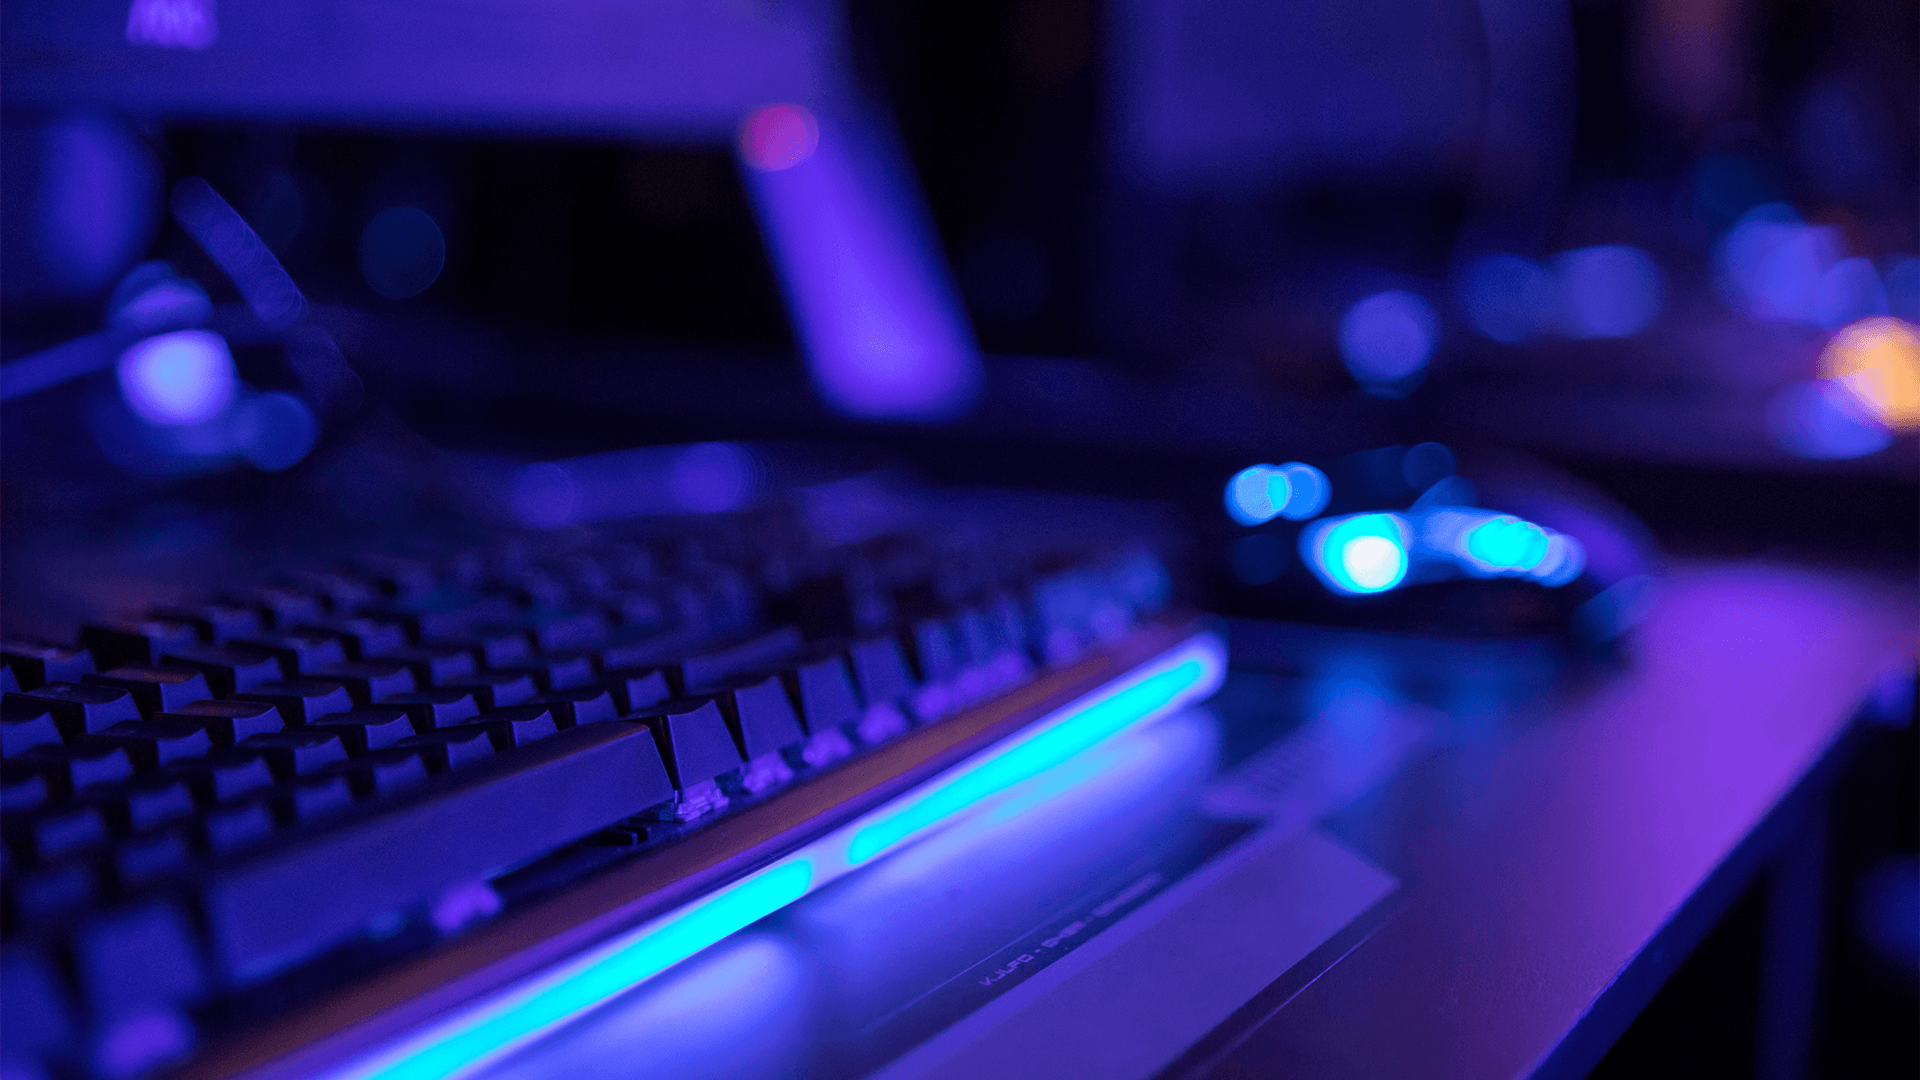 desktop keyboard and mouse blurred out in a blue colour